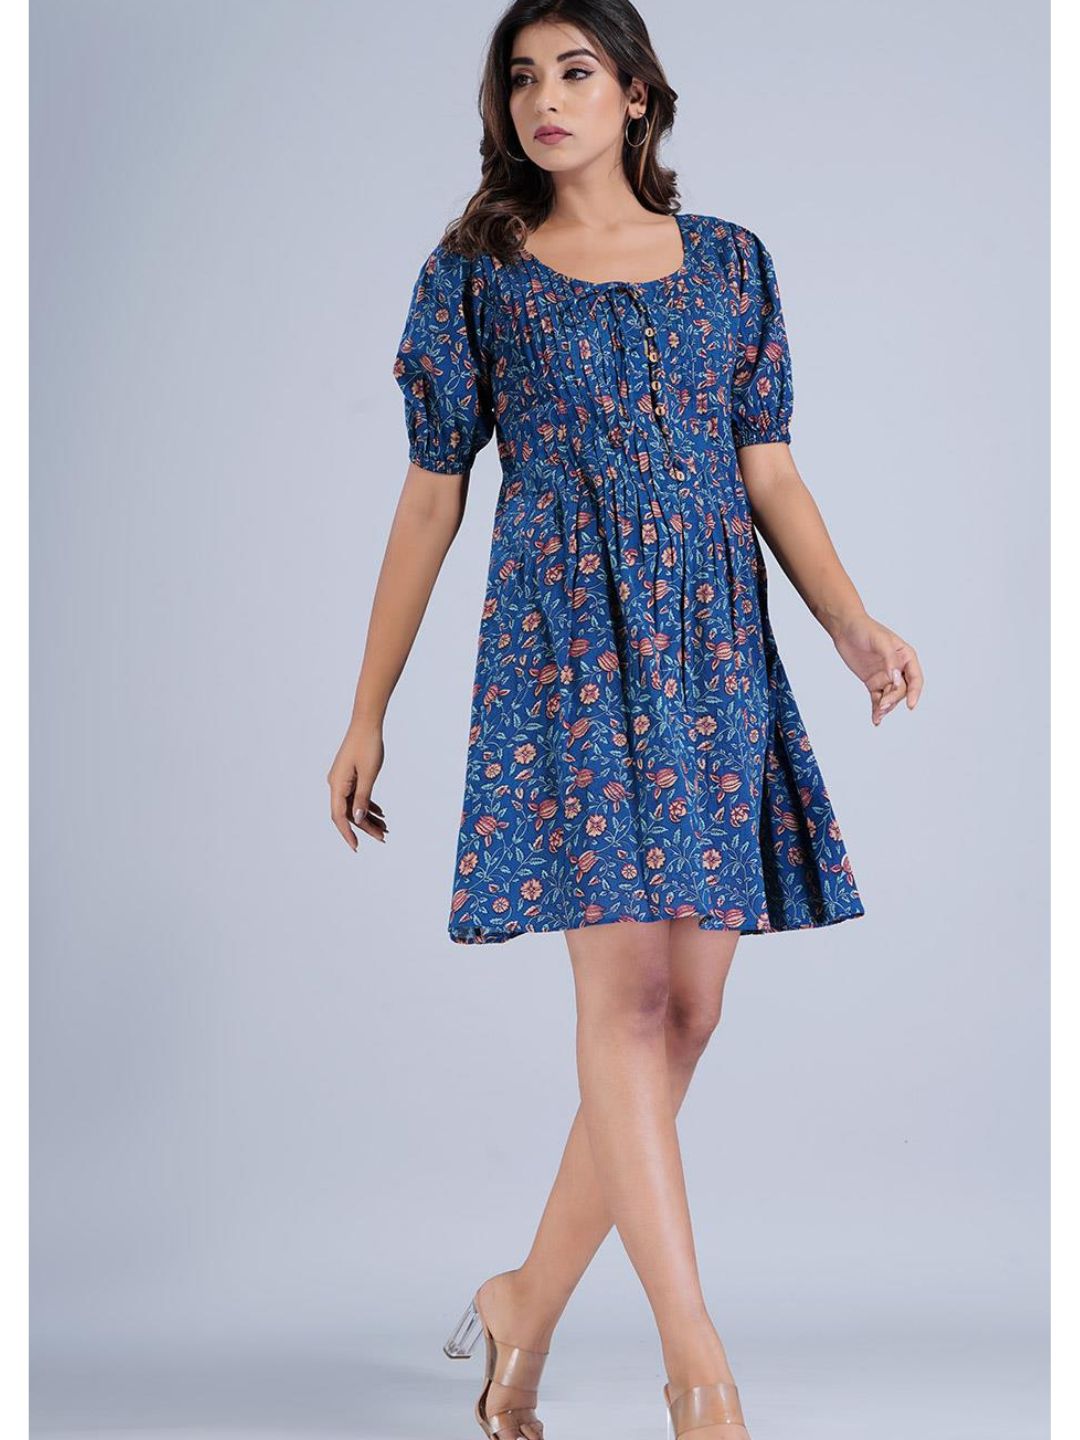 Navy Blue Printed Buttoned Short Pleat Dress